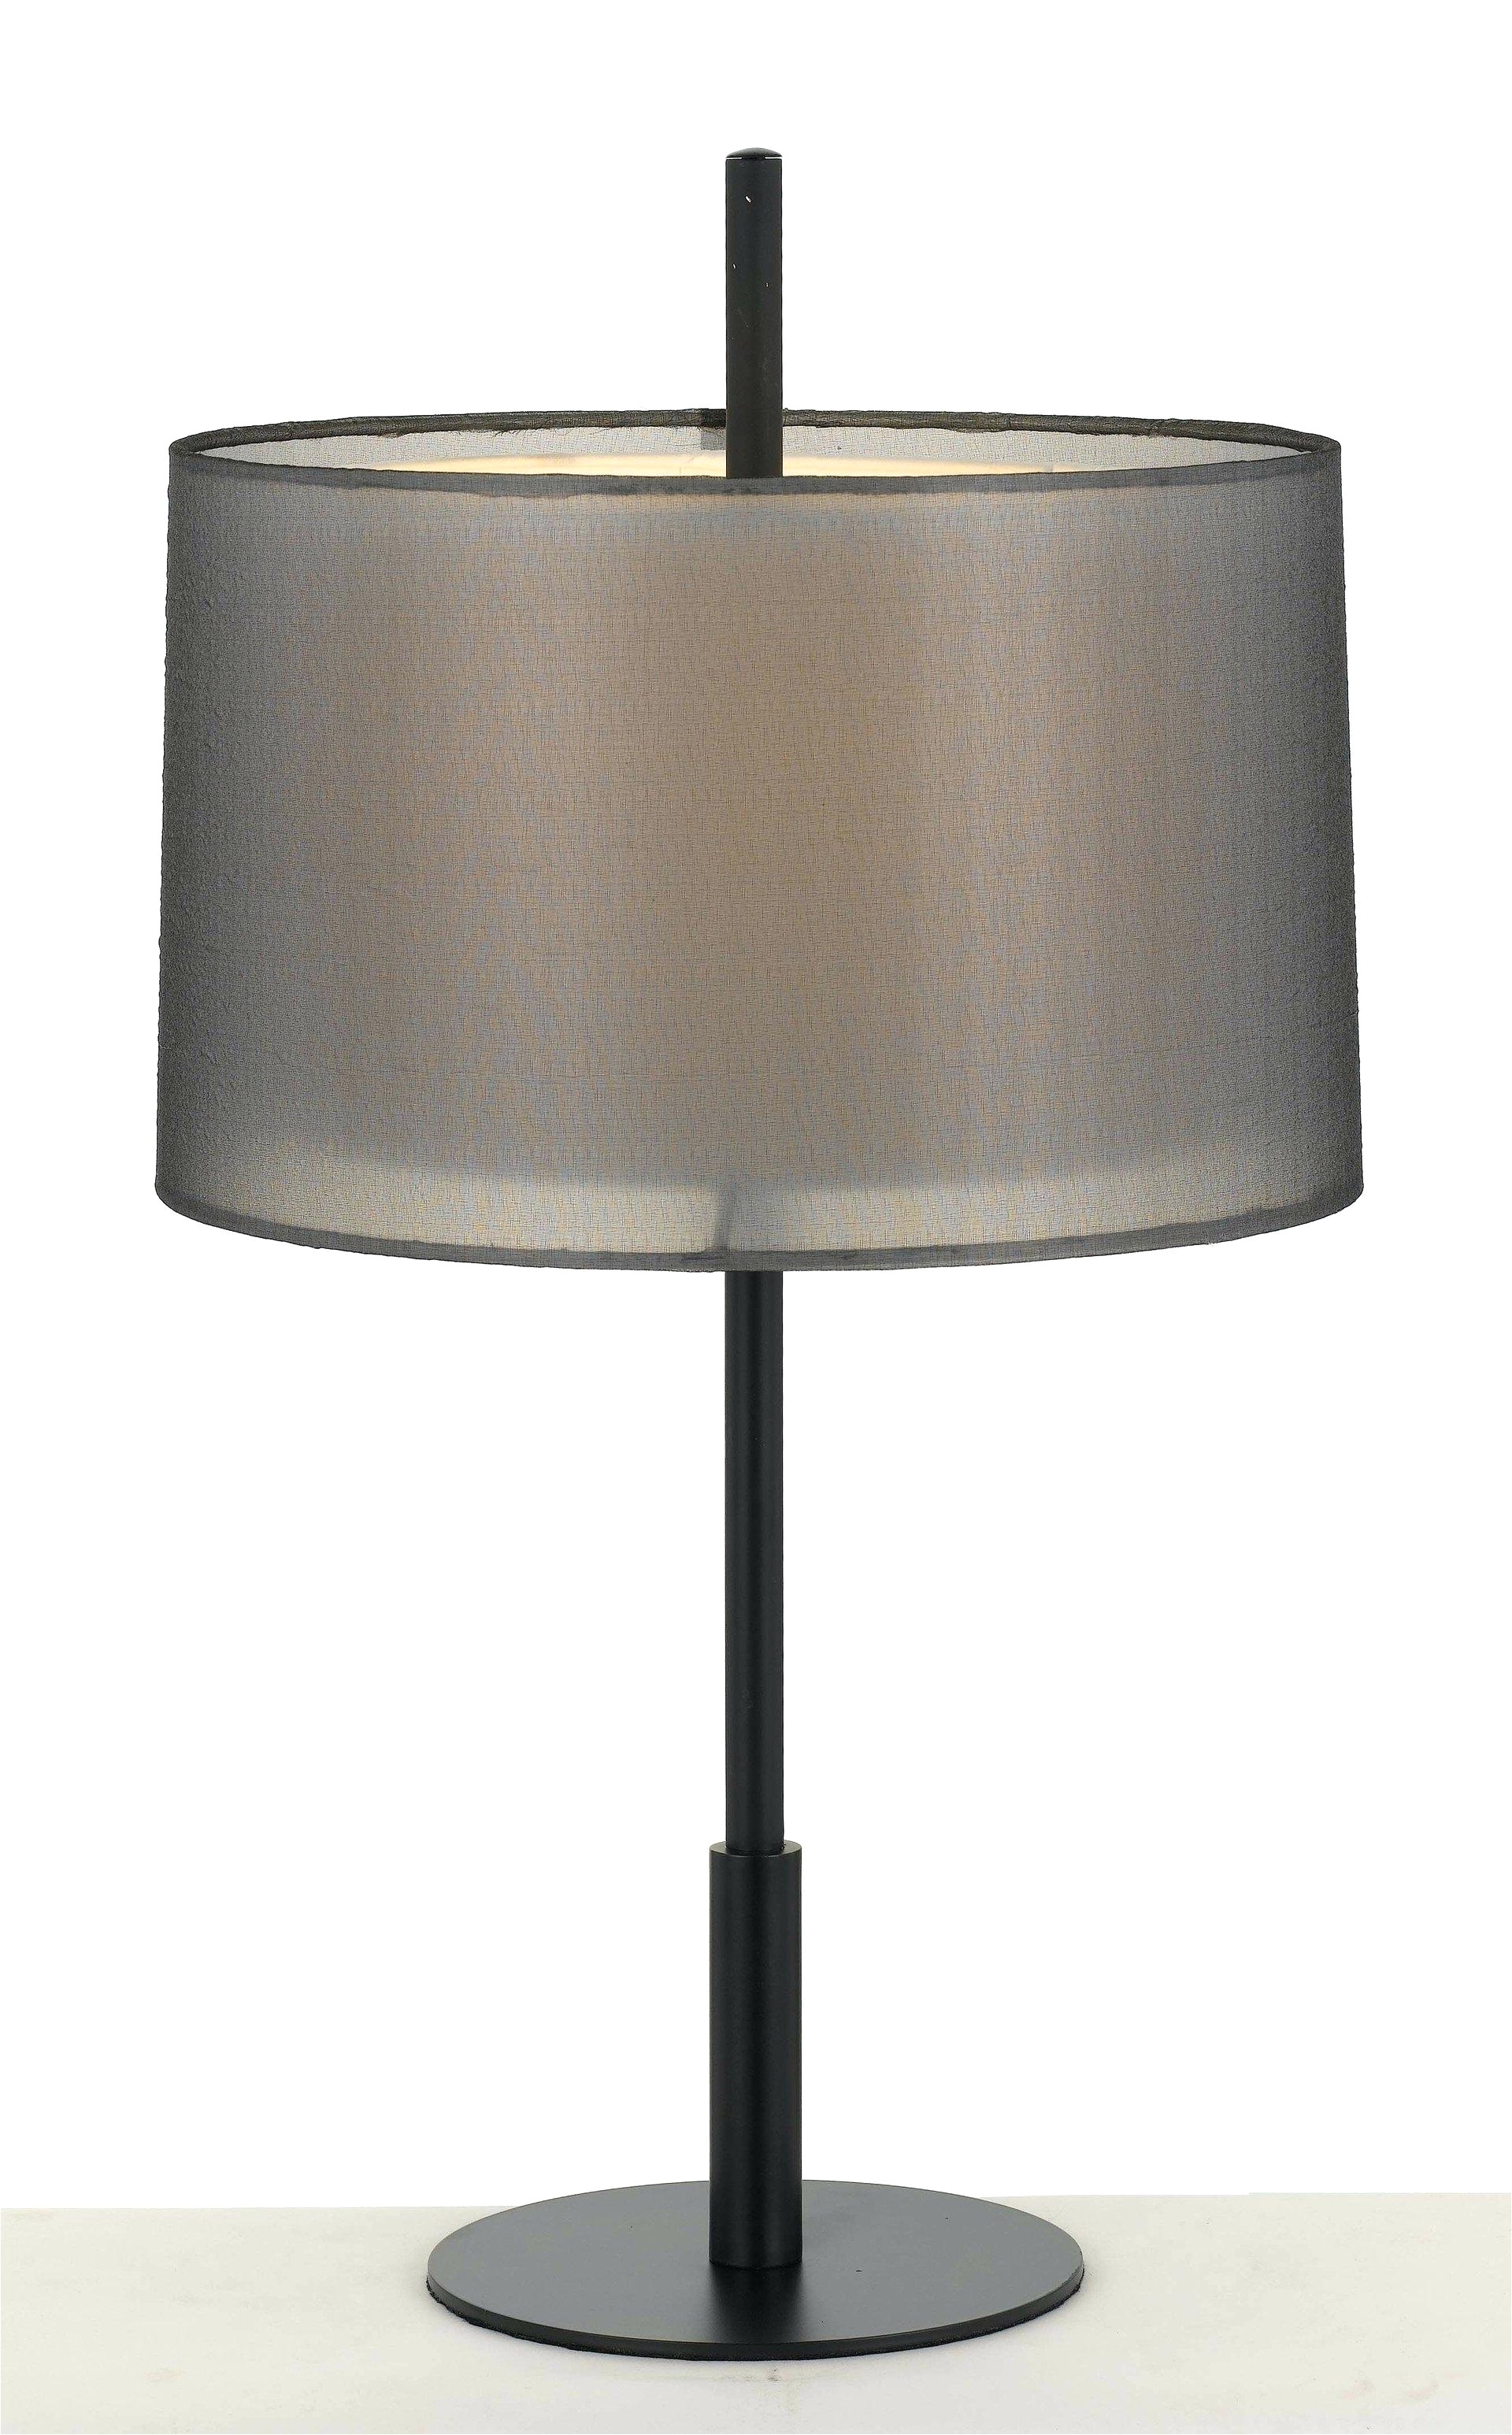 Catchy Tall Living Room Lamps In Lamp Lamp Lamp Unique Contemporary Table Lamp Free Table Lamps 0d